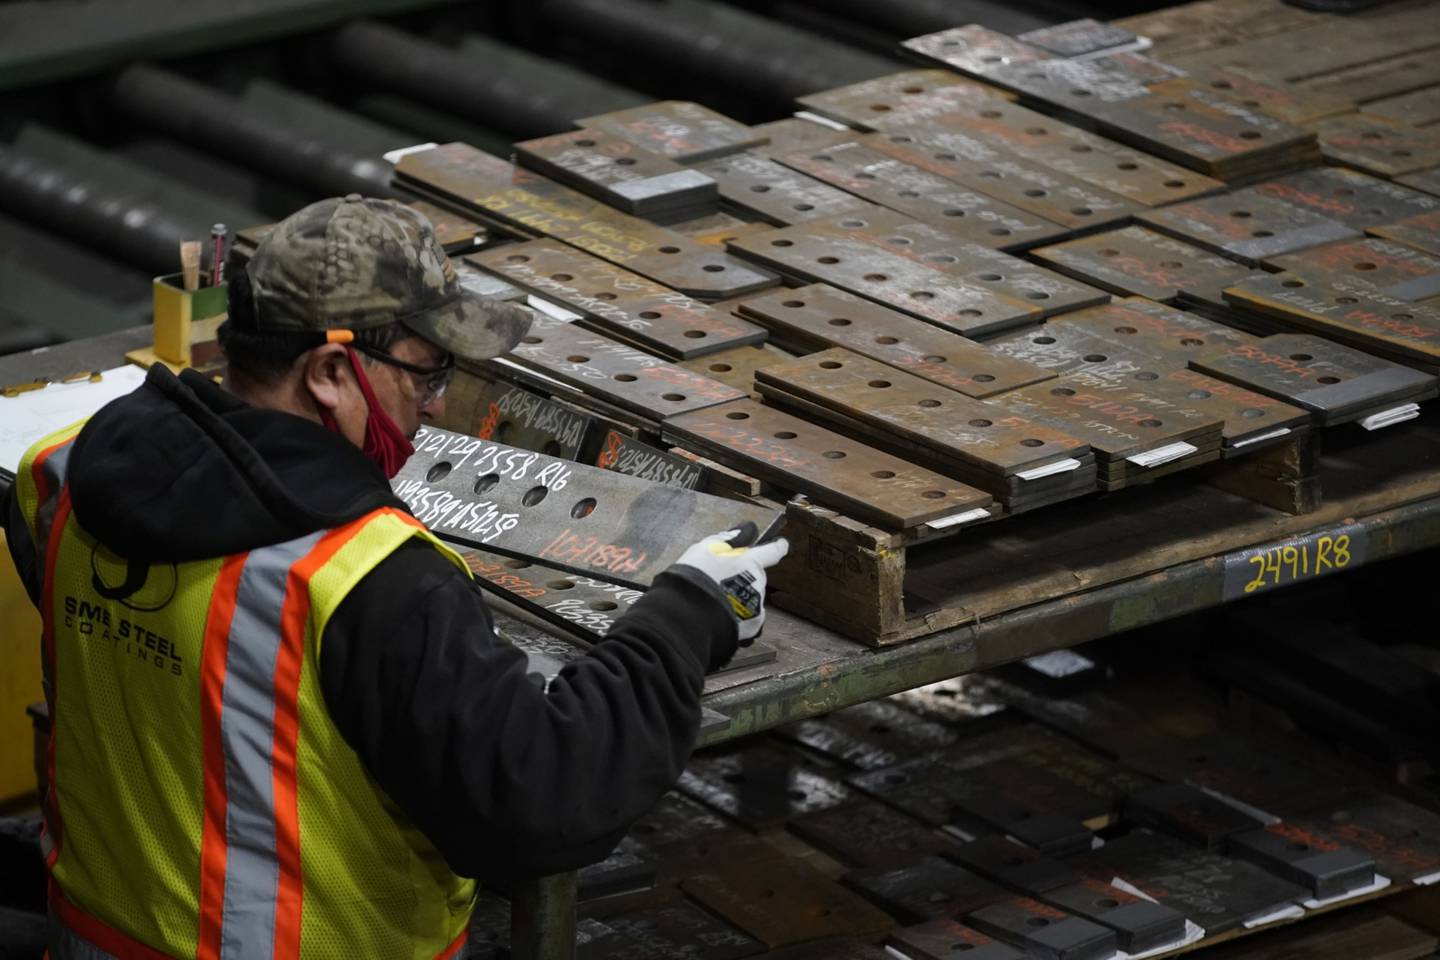 A worker gathers parts during production at the SME Steel Contractors facility in West Jordan, Utah, U.S., on Feb. 1, 2021. Markit is scheduled to release manufacturing figures on February 3. Photographer: George Frey/Bloomberg